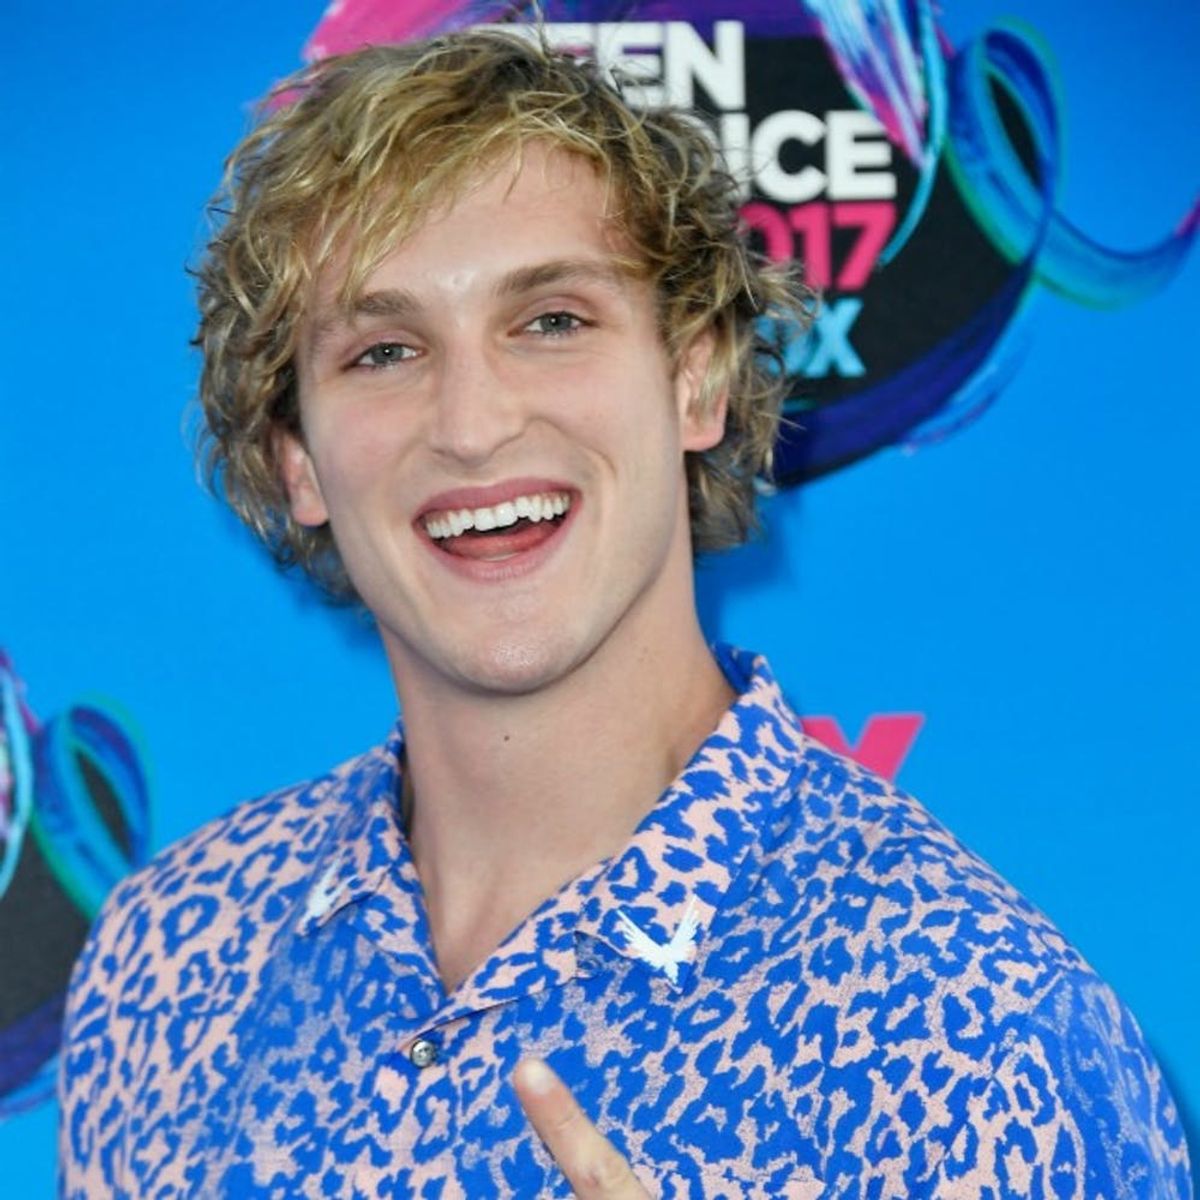 YouTuber Logan Paul Apologizes After Posting a Video With the Body of a Suicide Victim